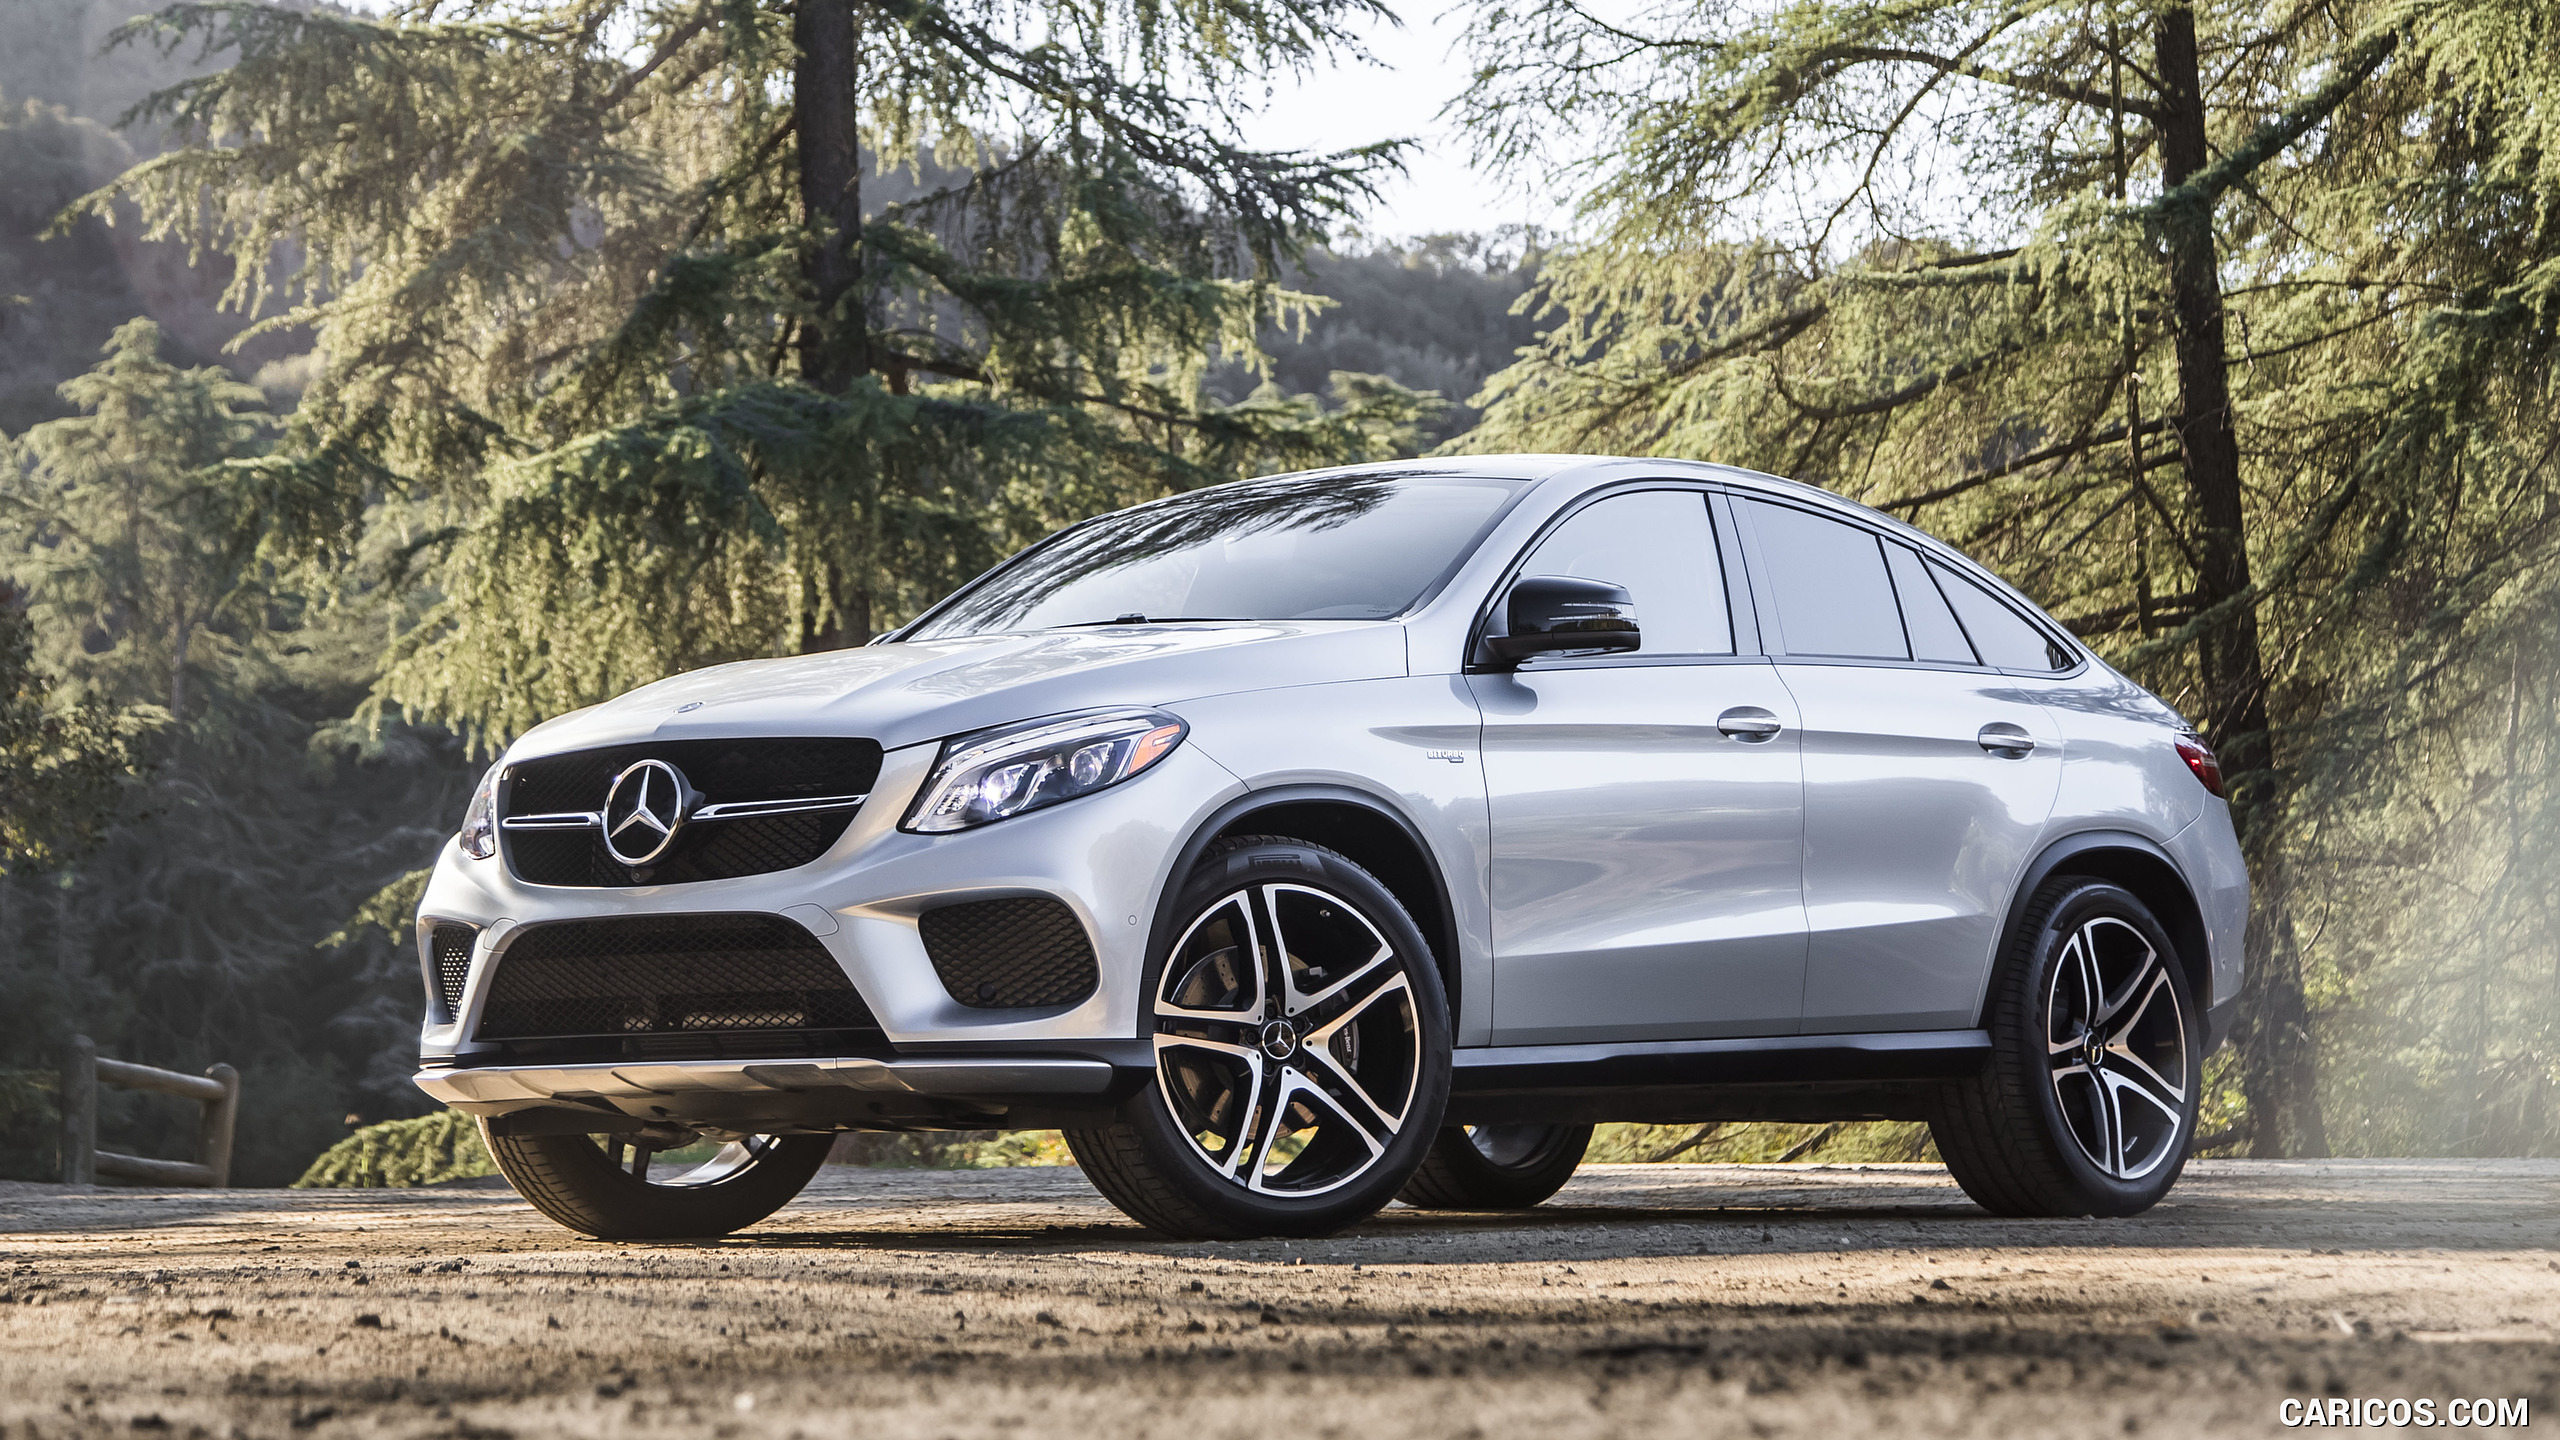 2017 Mercedes-AMG GLE 43 Coupe (US-Spec) - Front Three-Quarter, #10 of 29